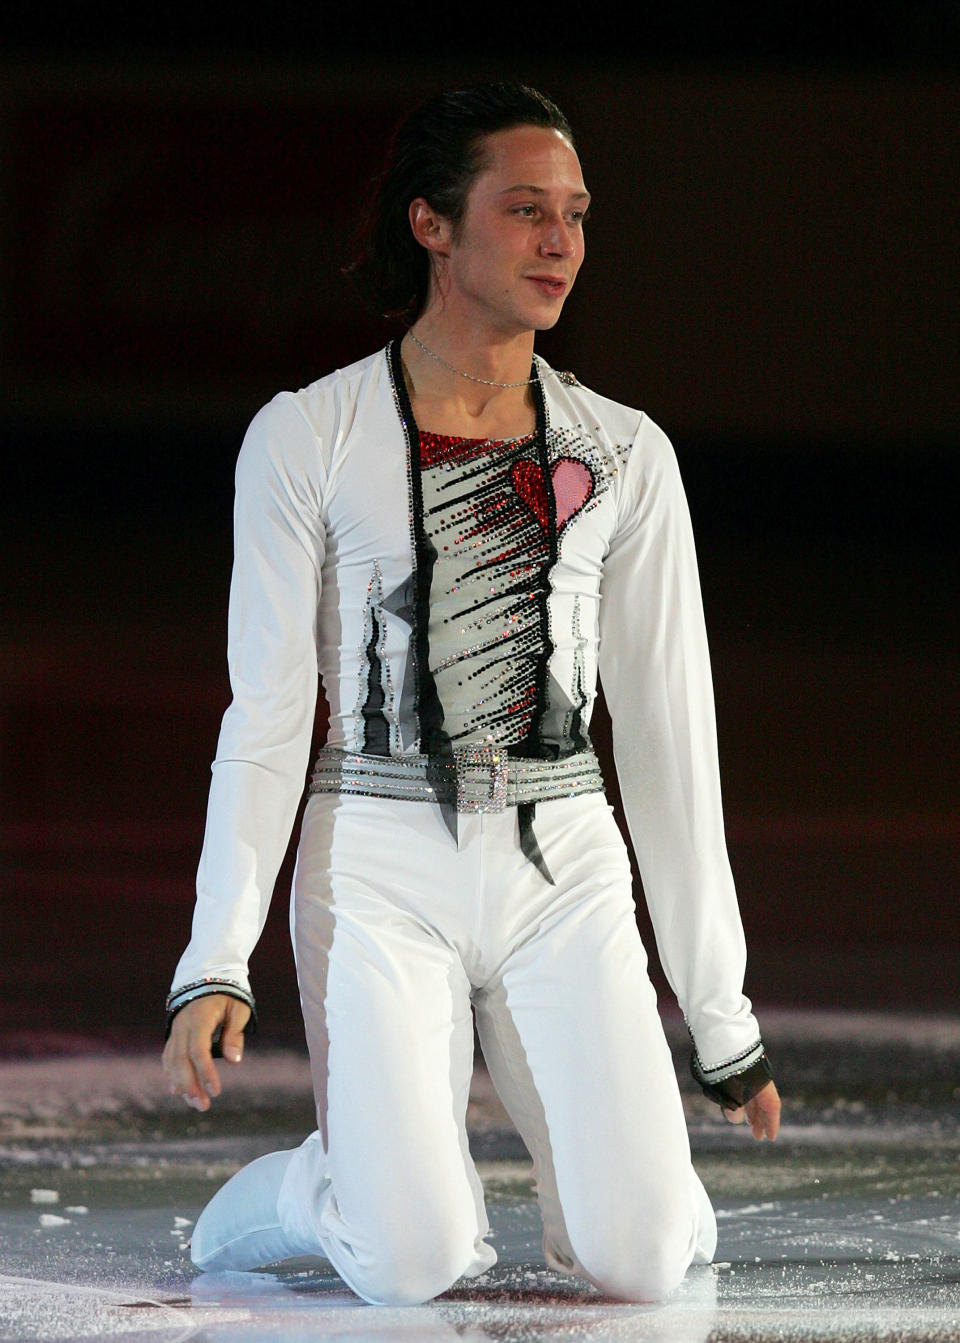 Performing&nbsp;in an exhibition during the State Farm U.S. Figure Skating Championships on Jan. 28, 2007, at Spokane Arena in Spokane, Washington.